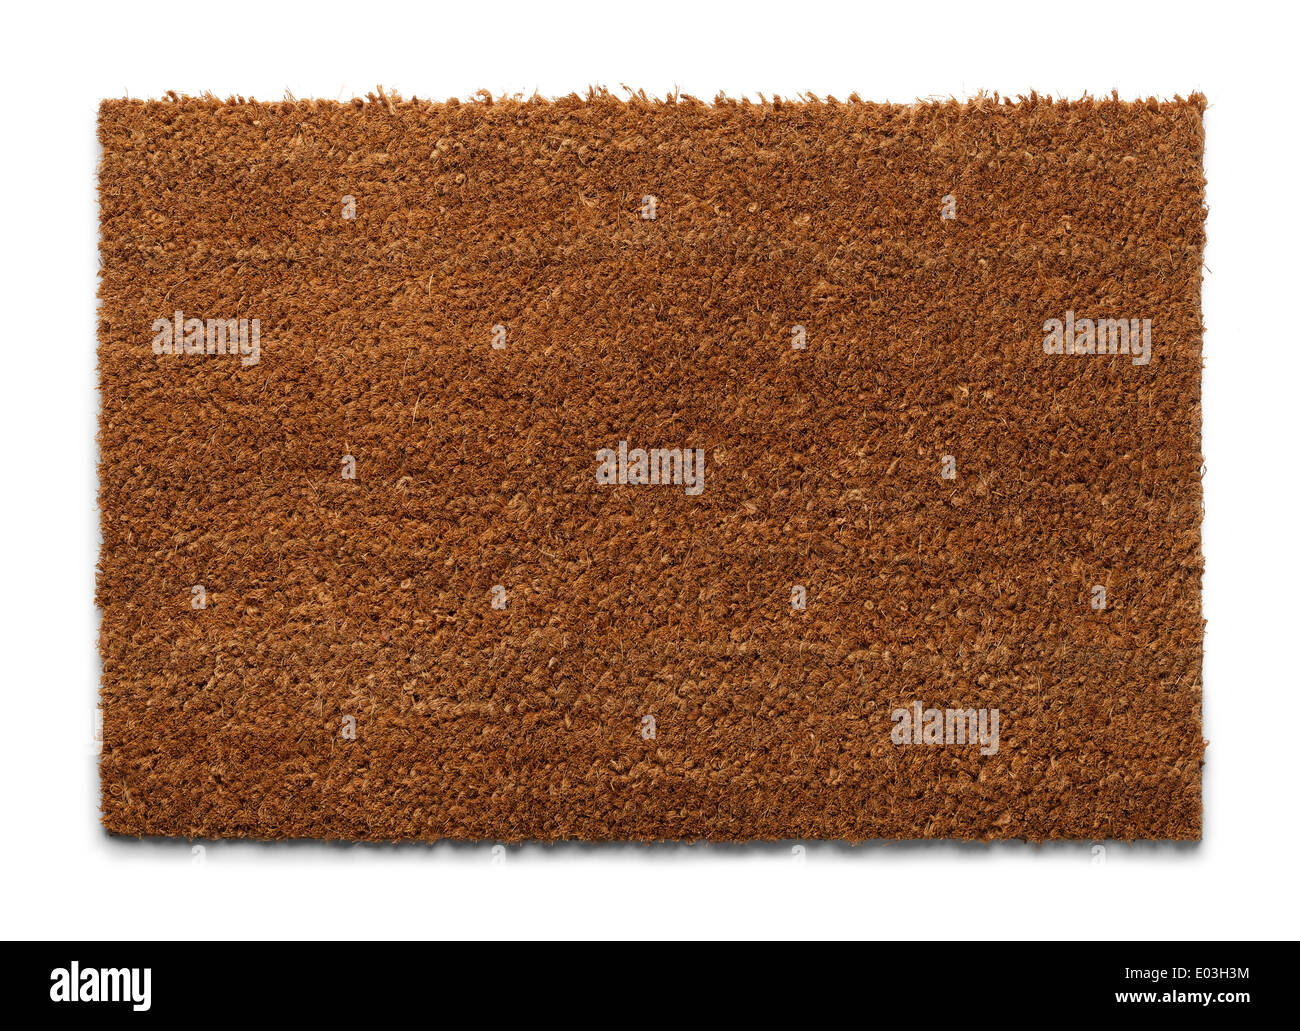 Natural Fiber Welcome Mat with Copy Space Isolatedon White Background. Stock Photo